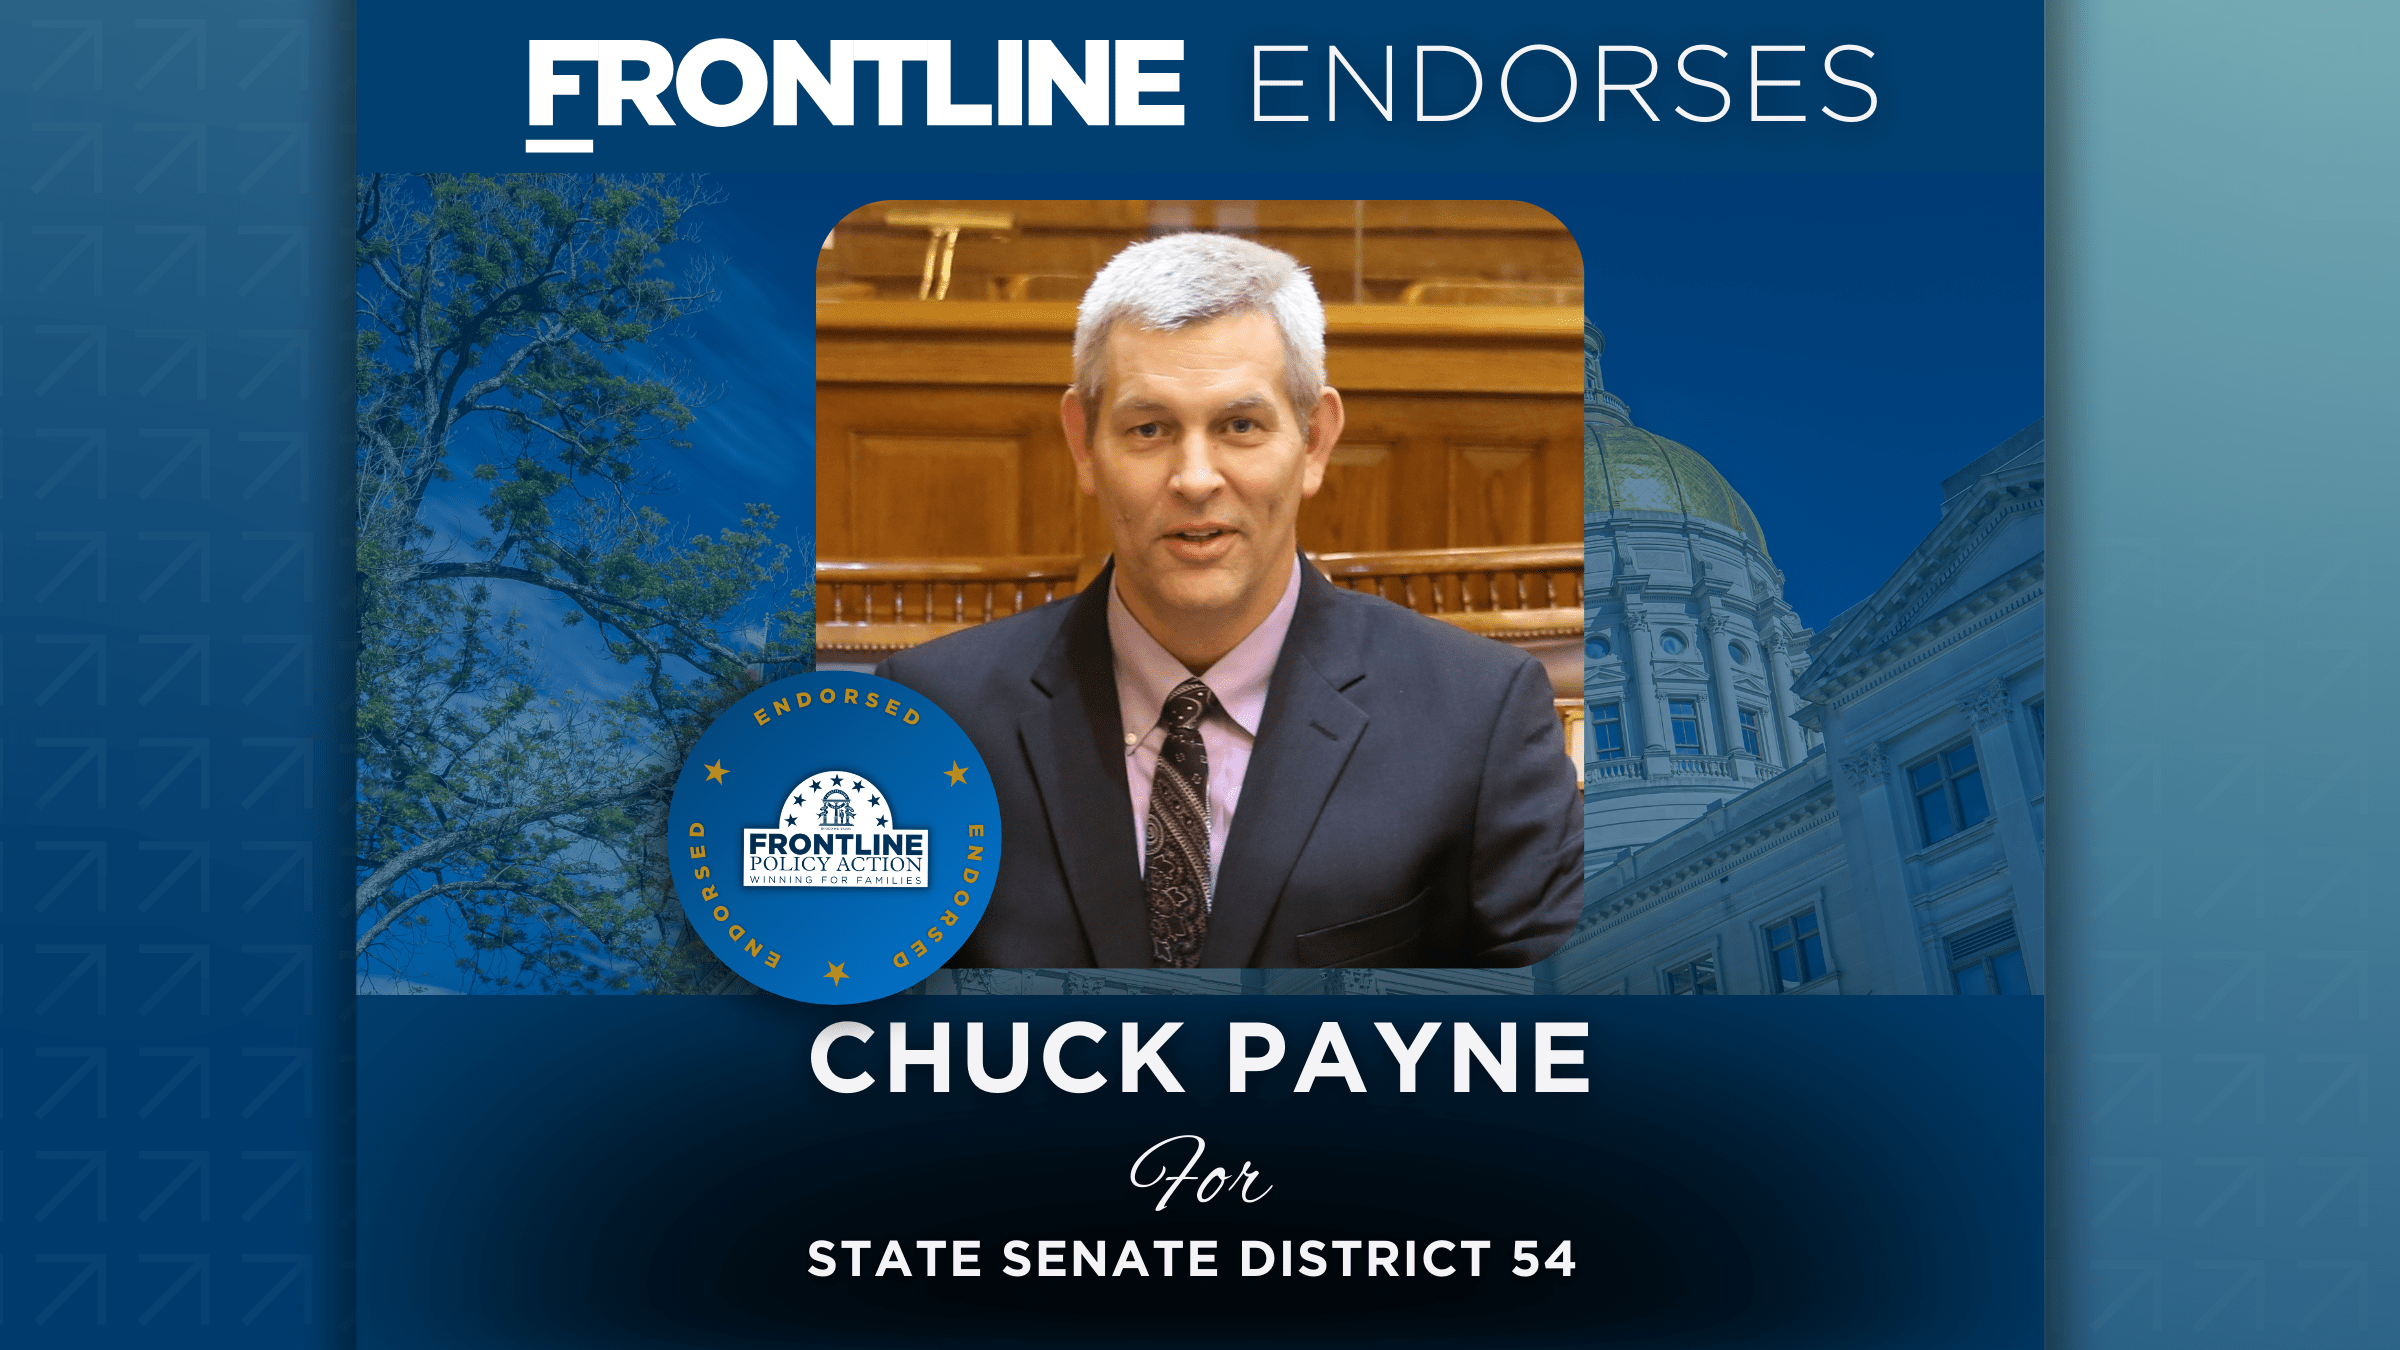 Reminder – Vote for Chuck Payne for State Senate District 54